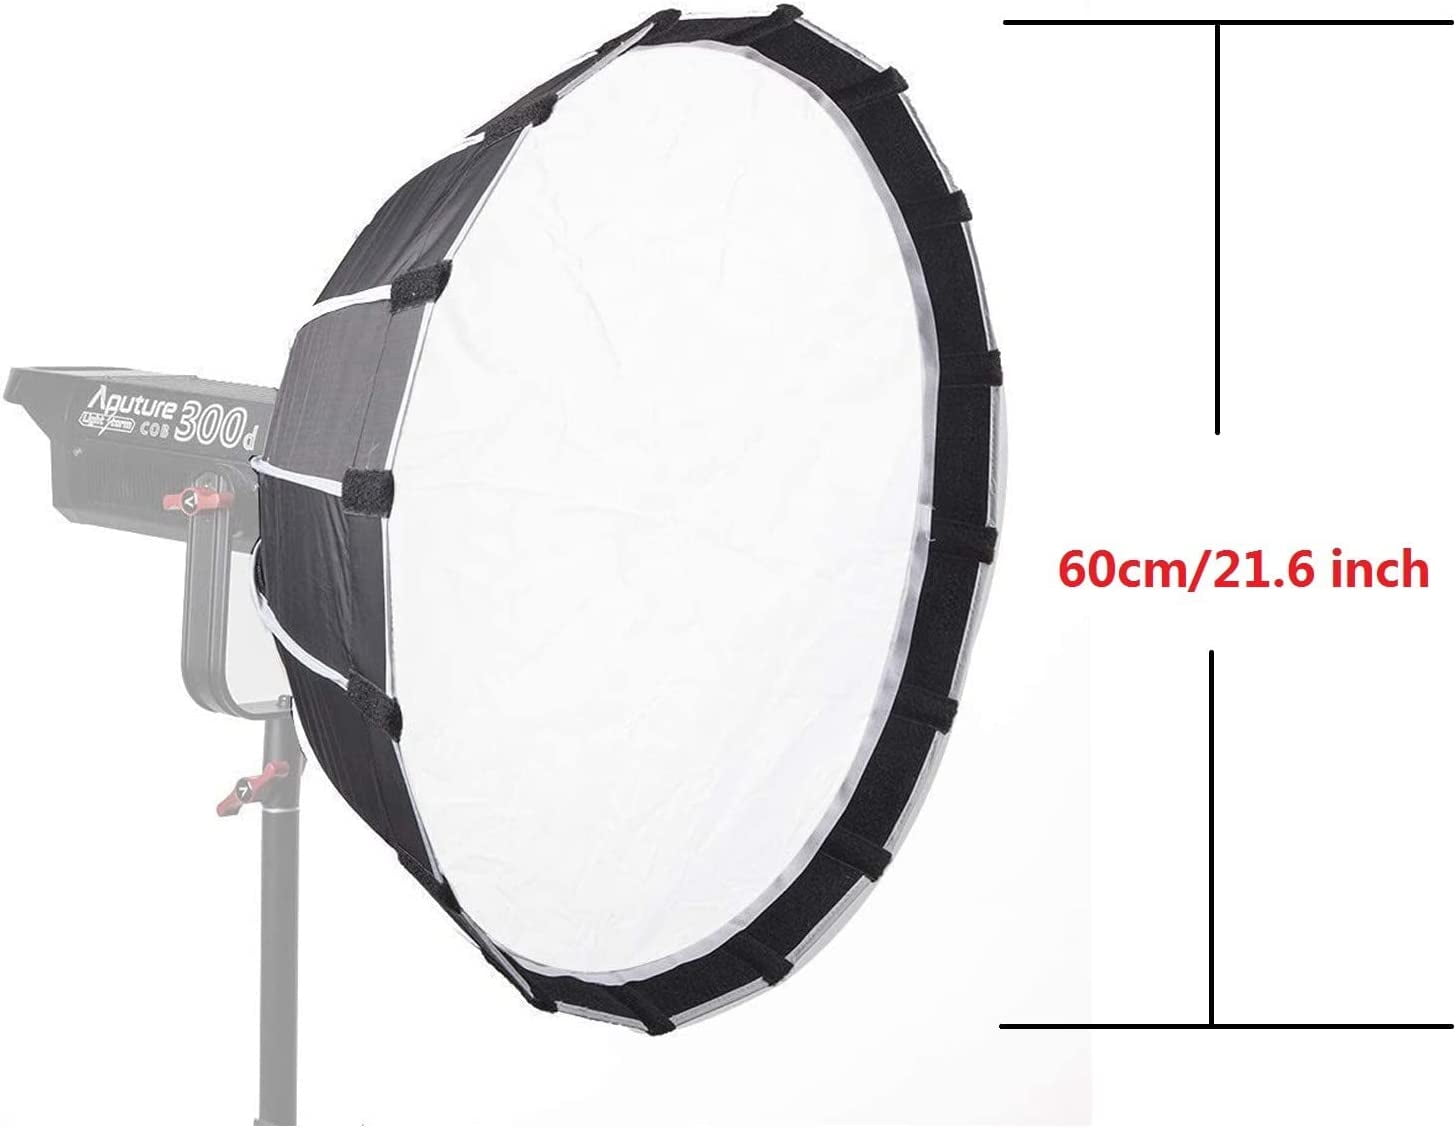 Aputure Light Dome Mini II Softbox for Aputure 120D Mark 2 300D II 120D and  Other Bowen-S Mount Lights (21.6 Inch Deep Octagon)